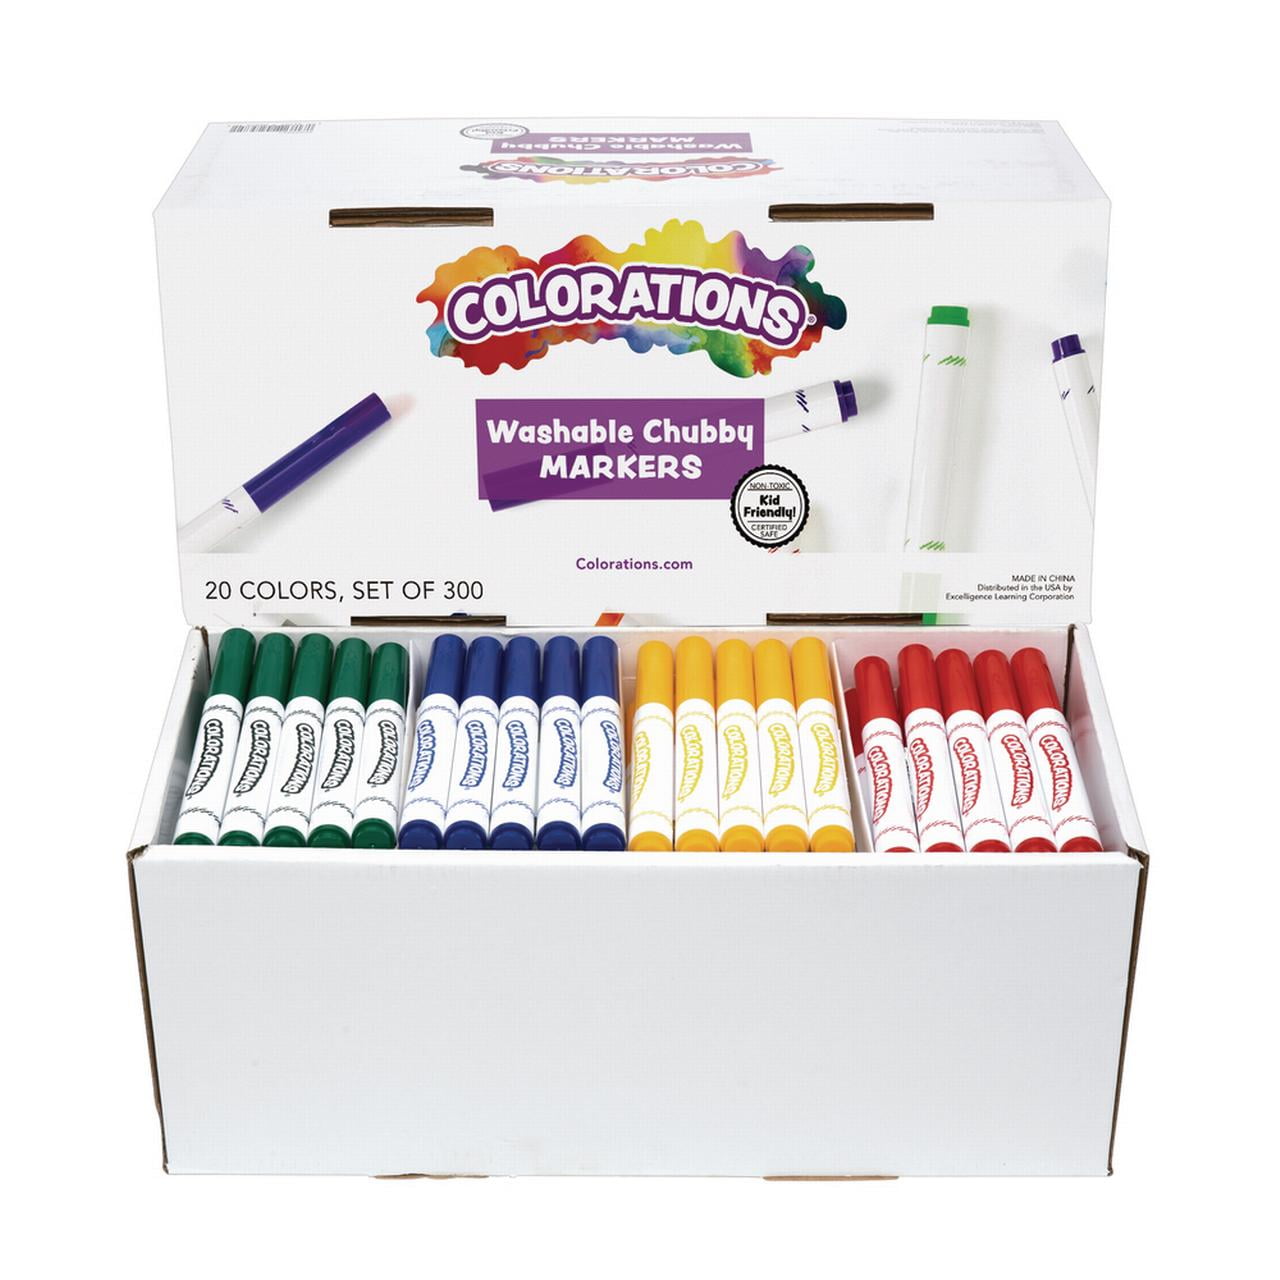 Colorations® Washable Chubby Markers Classroom Value Pack - Set of 256